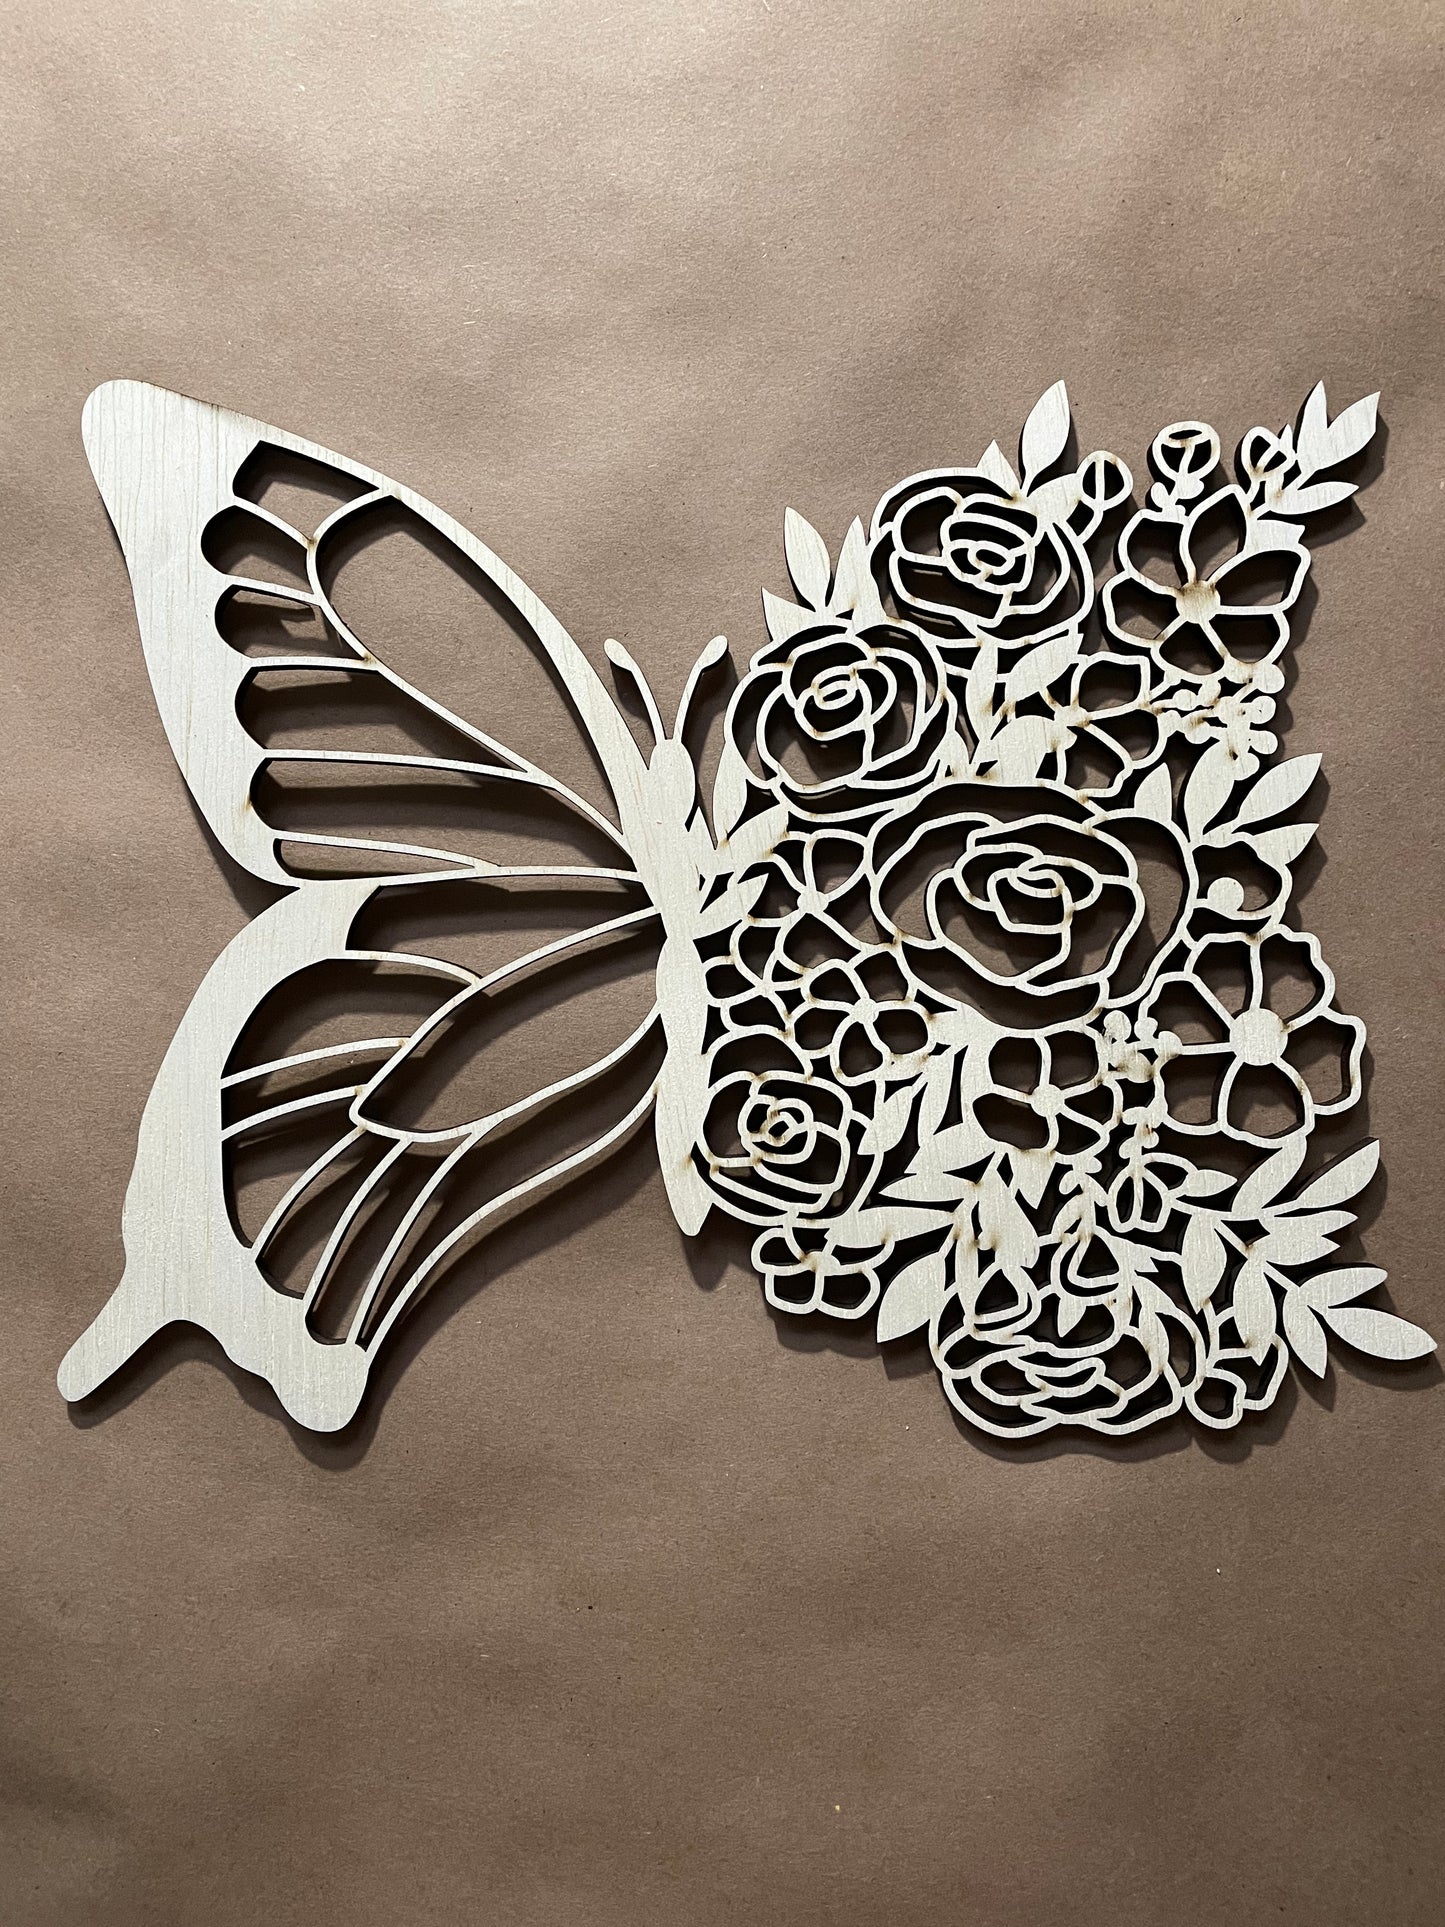 Half Floral Butterfly Unfinished Wood Cut Out. Unfinished Wood frame. Resin art frame. DIY wood cutout. Unfinished laser cut wood resin frame.